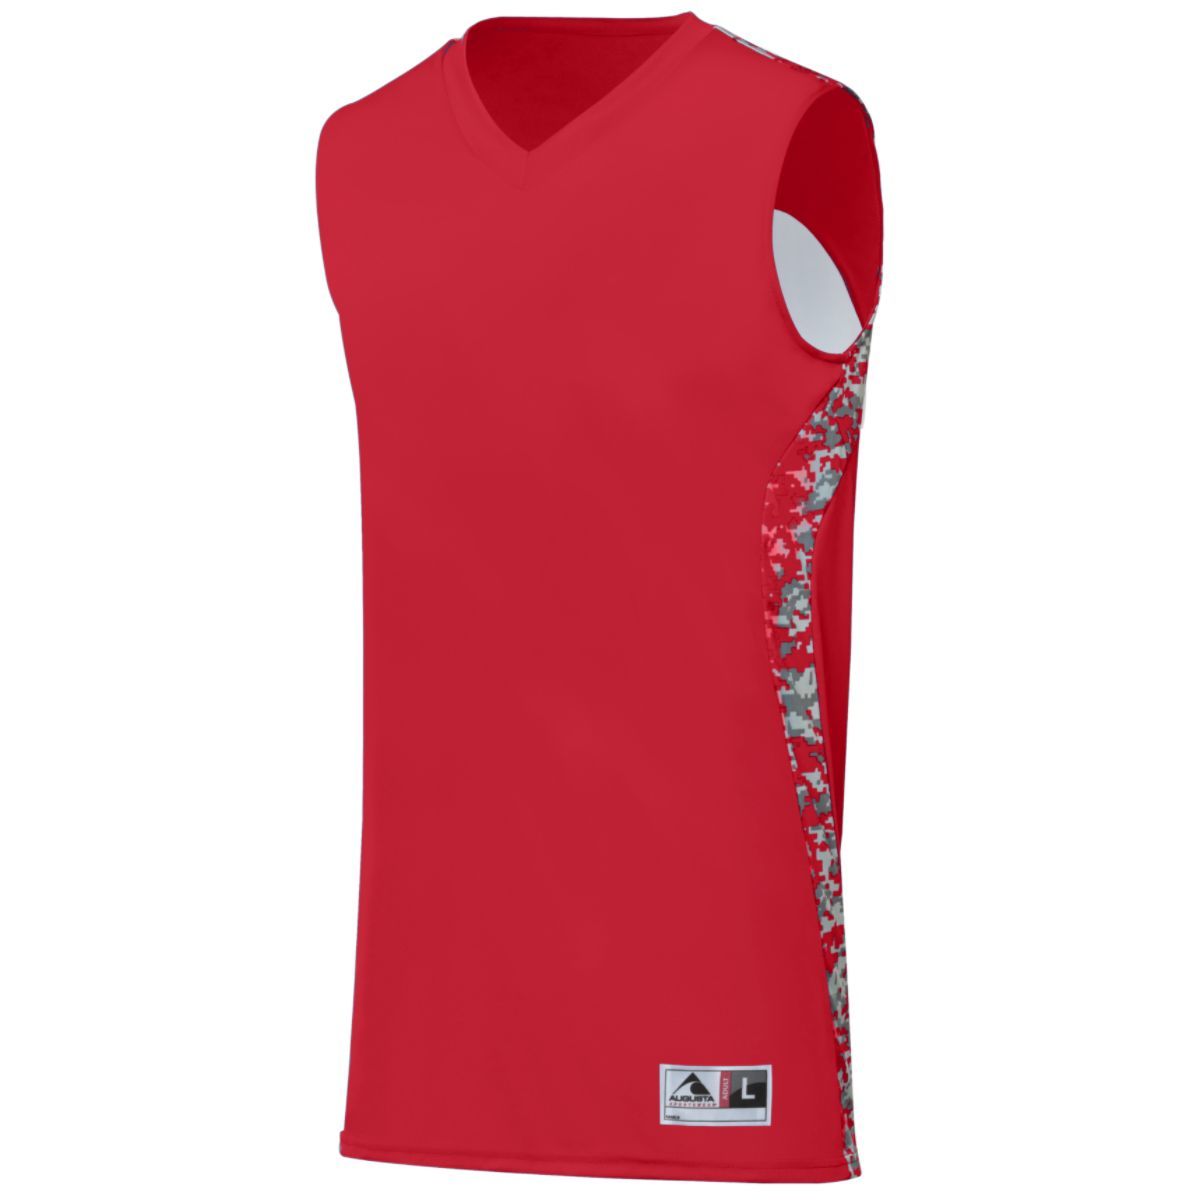 Augusta Sportswear Hook Shot Reversible Jersey in Red/Red Digi  -Part of the Adult, Adult-Jersey, Augusta-Products, Basketball, Shirts, All-Sports, All-Sports-1 product lines at KanaleyCreations.com